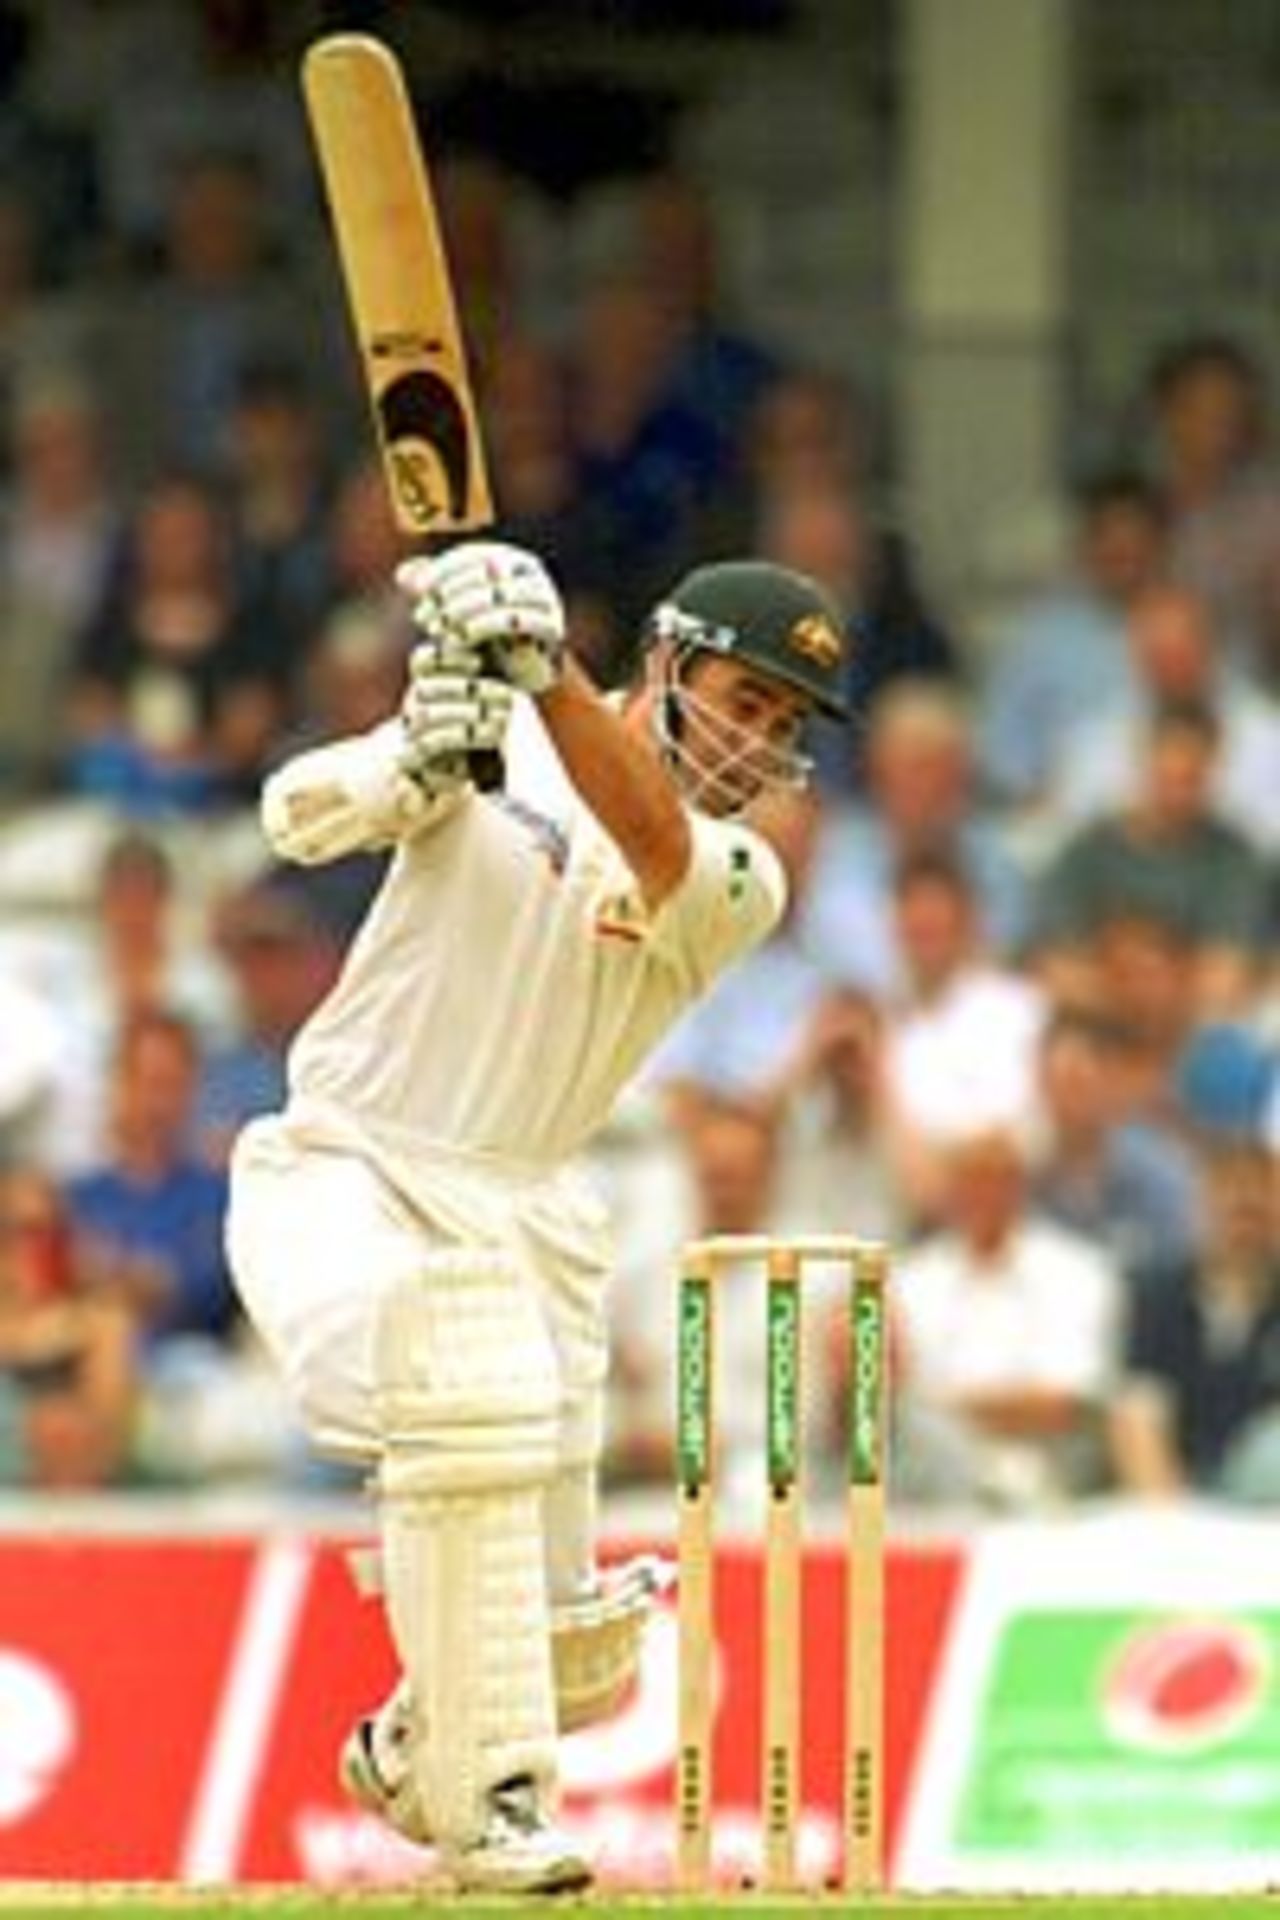 23 Aug 2001: Justin Langer of Australia in action during the first day of the 5th Ashes Test between England and Australia at The AMP Oval, London.